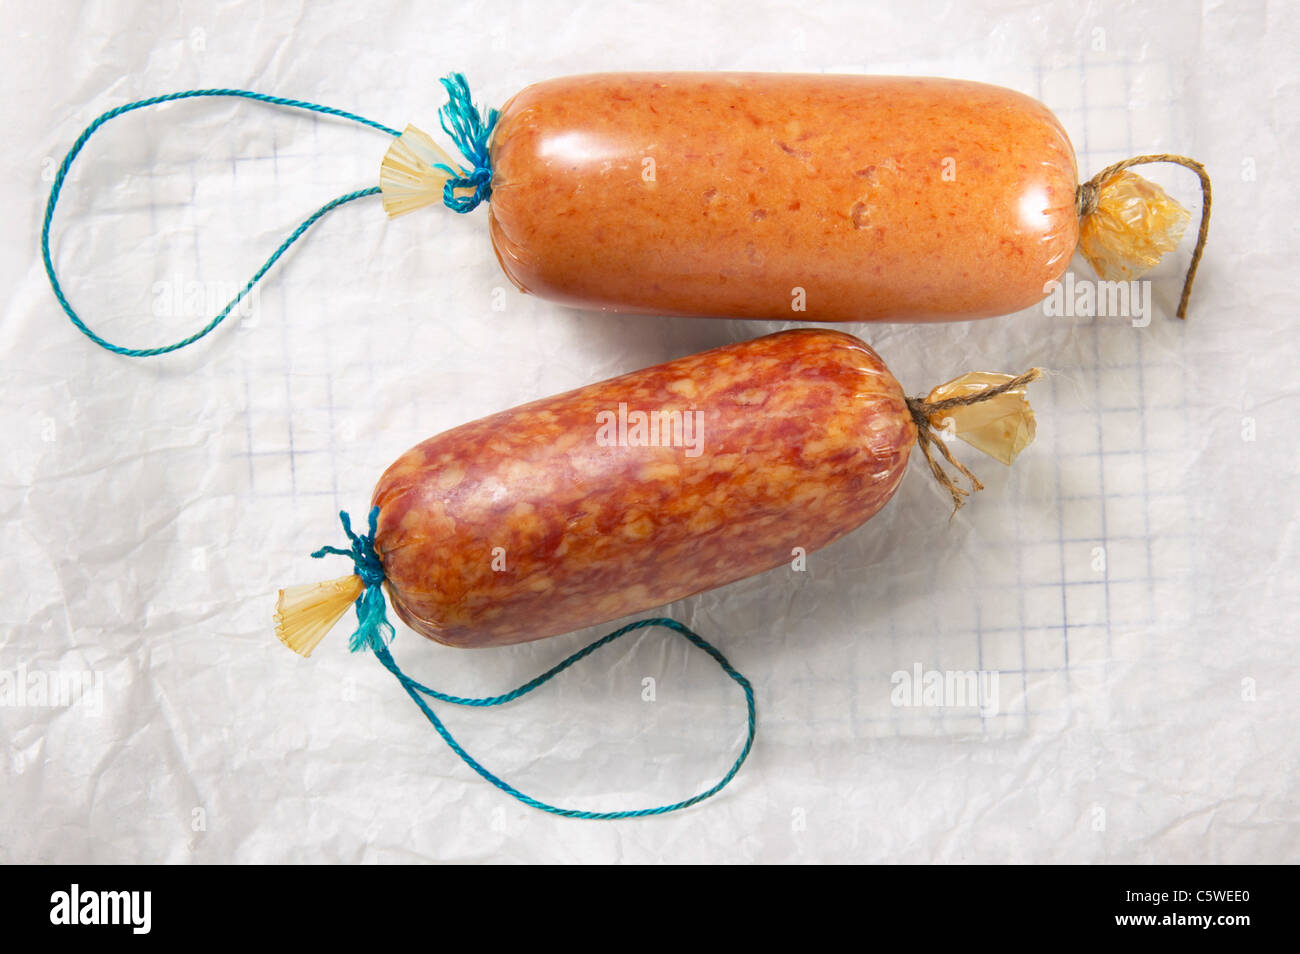 Mettwurst sausages, elevated view Stock Photo